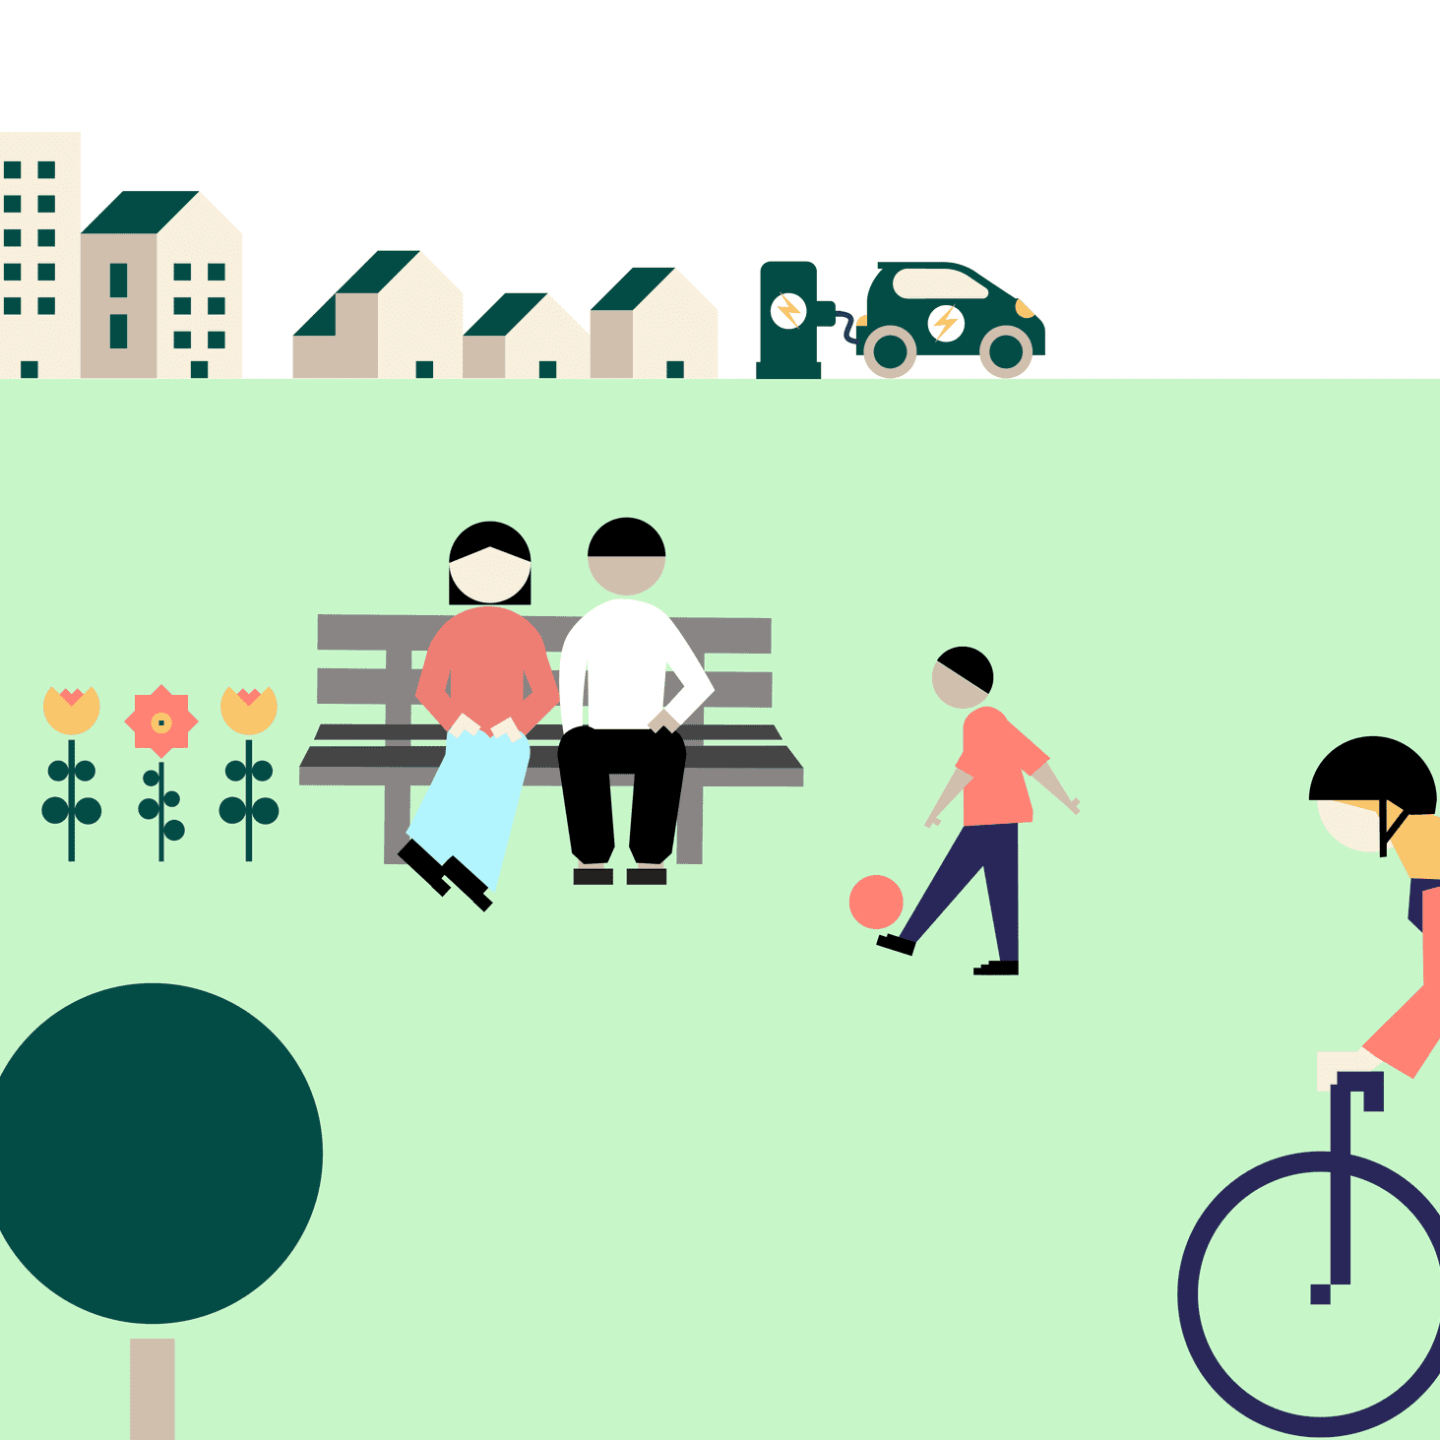 climate budgets, illustration of people mooving around in a park with houses in the back